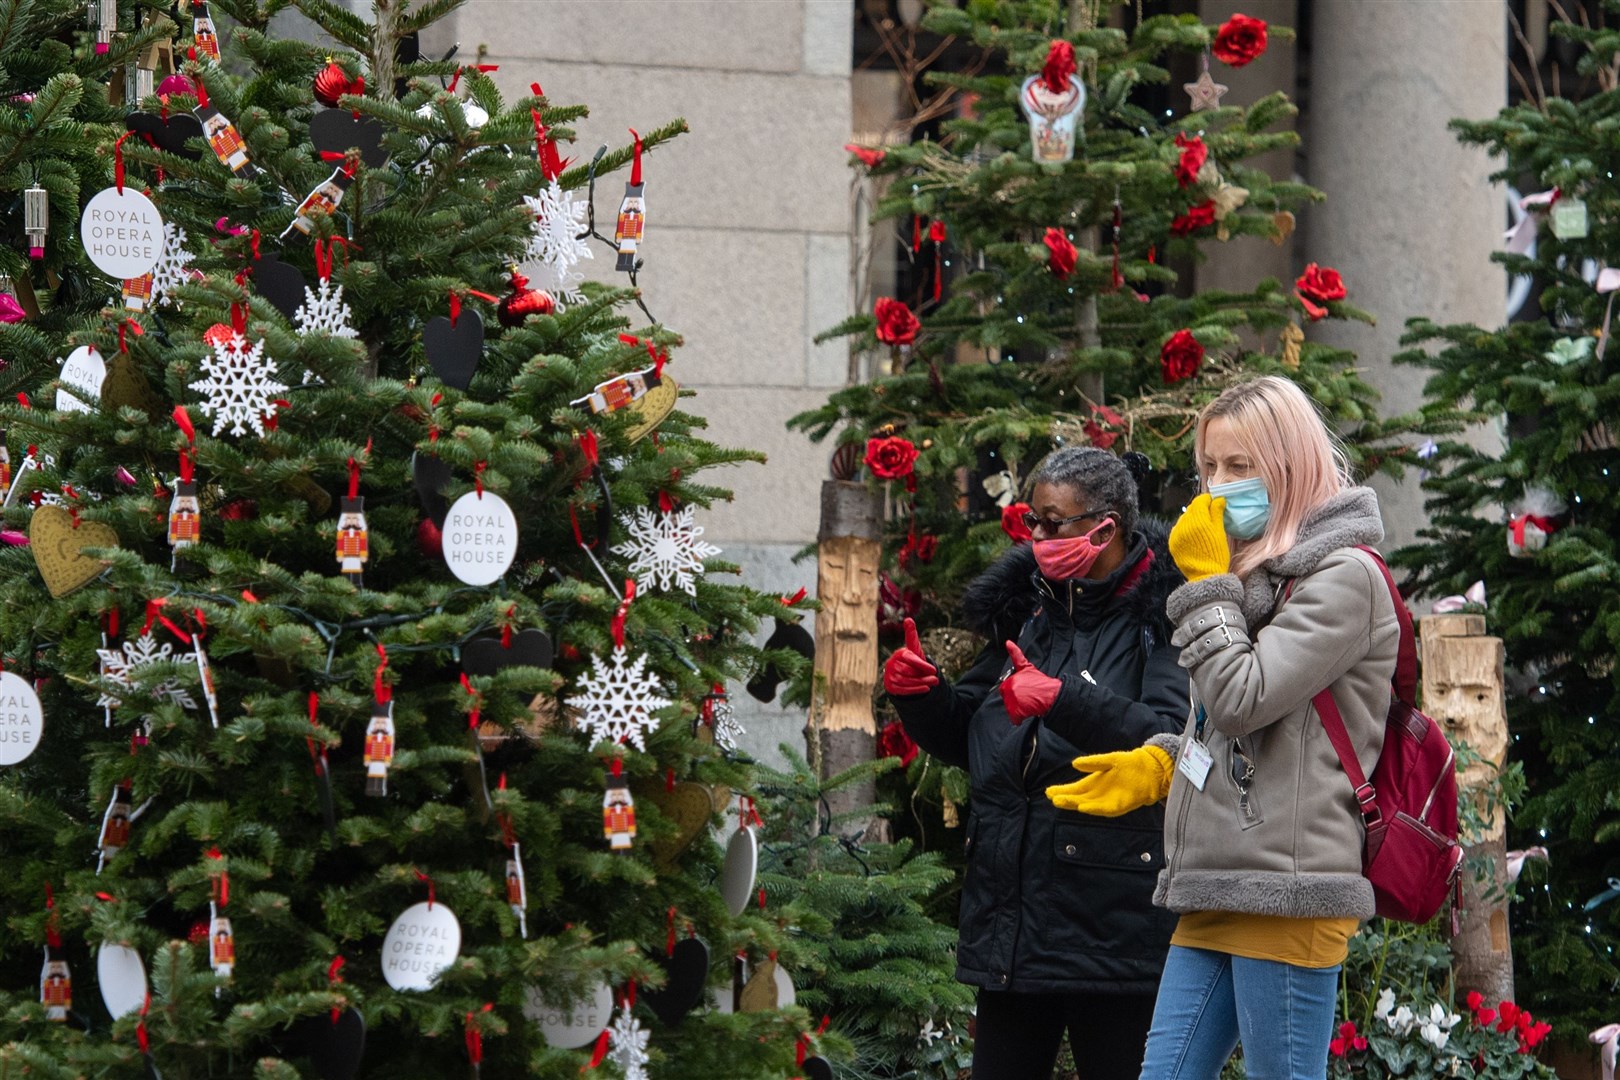 The announcement of the rules for Christmas mean families can start making plans for Christmas (Dominic Lipinski/PA)